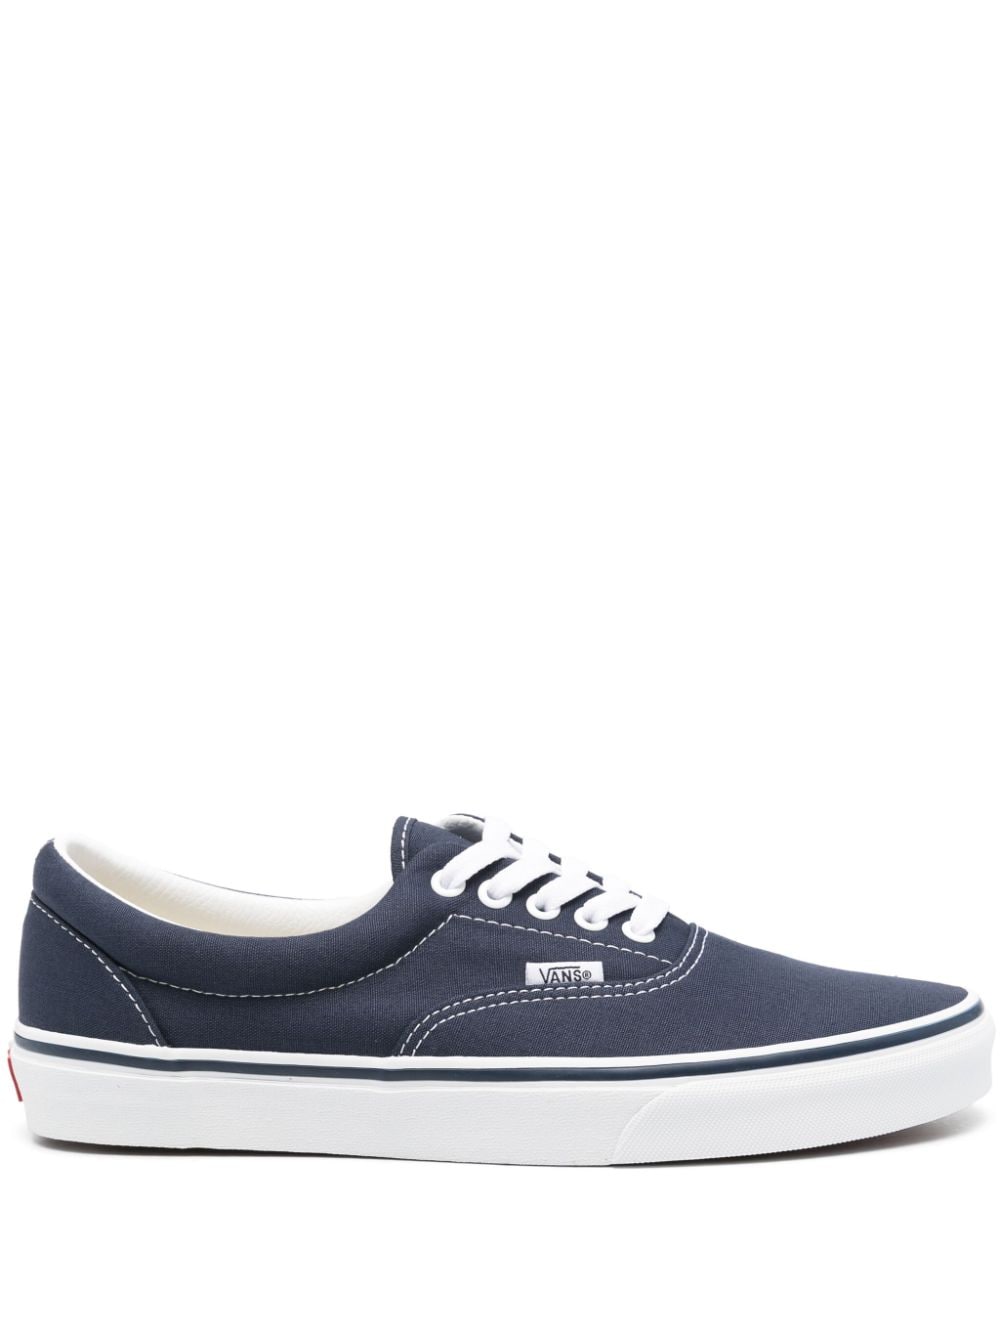 Image 1 of Vans Authentic canvas sneakers